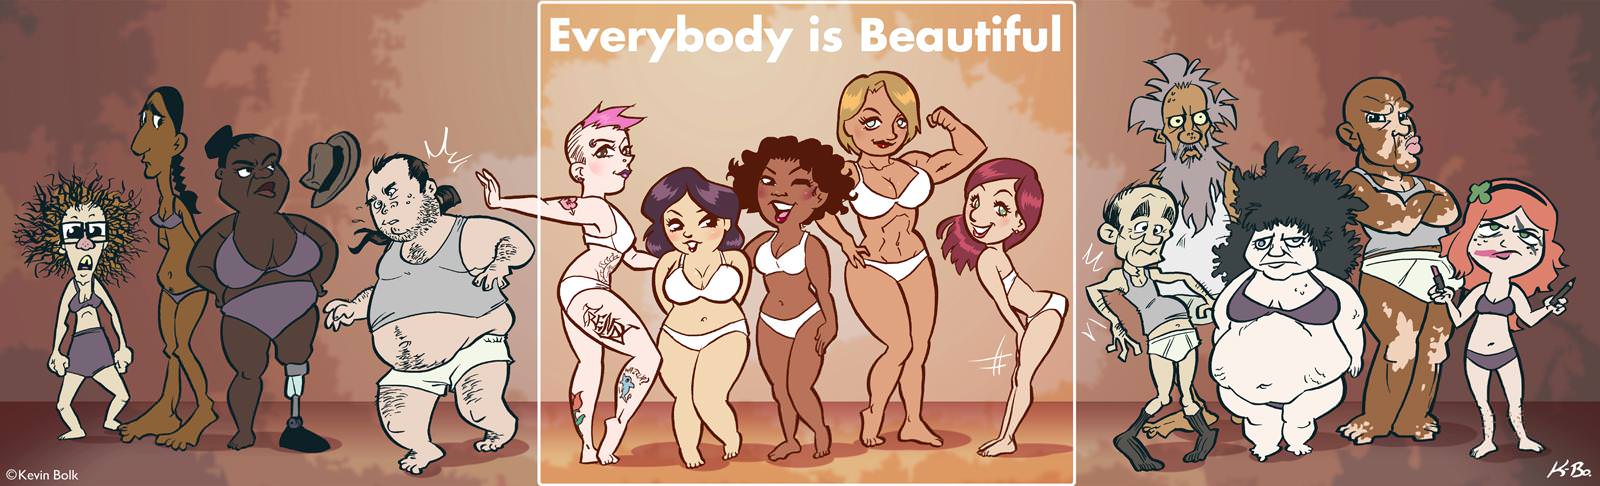 every body is beautiful - Everybody is Beautiful 2 Ve . Abah Go Hele cos Ww Kevin Bolk BBo